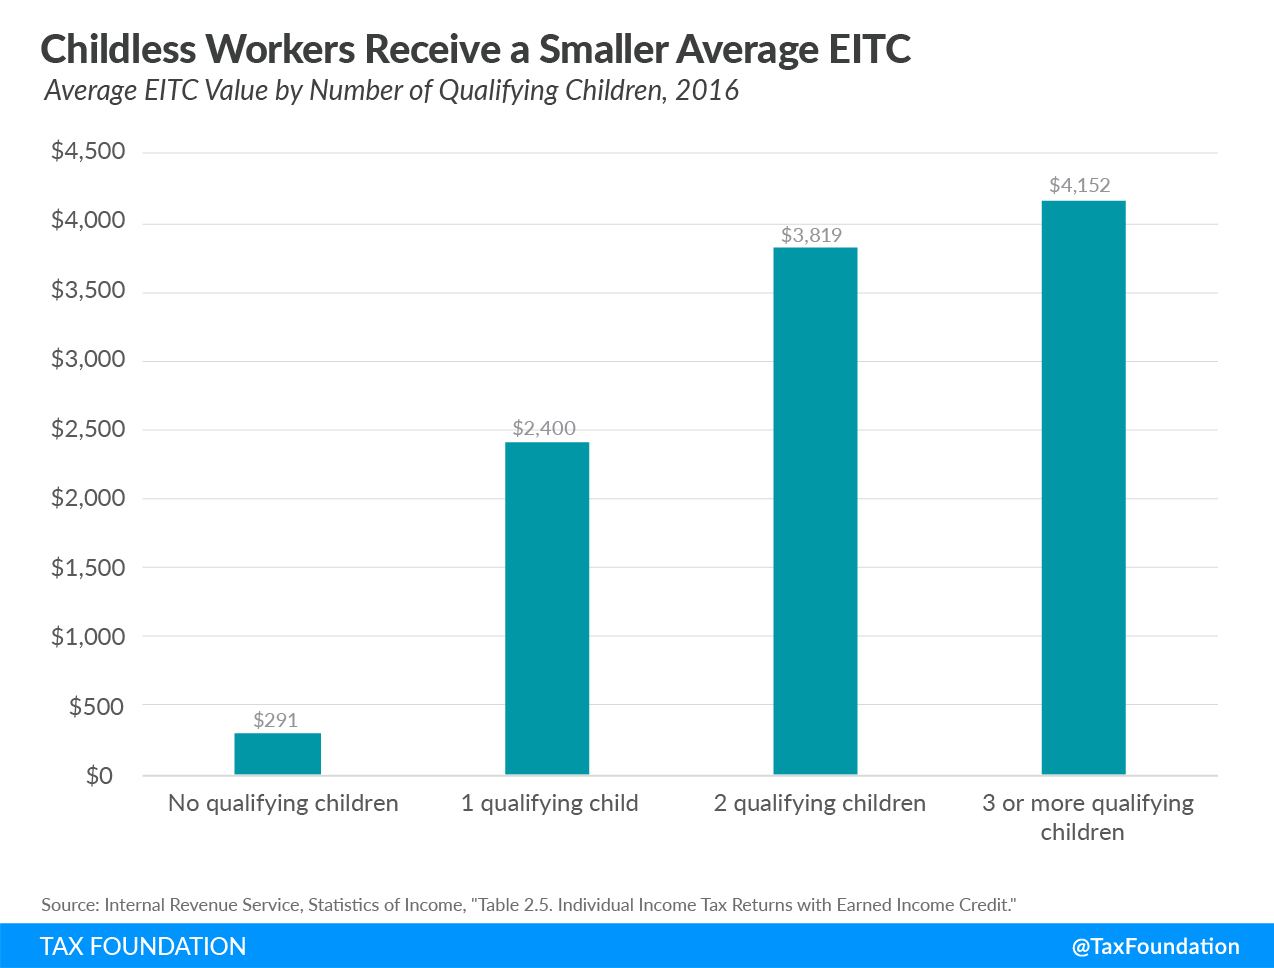 The EITC disproportionally benefits workers with children, earned income tax credit, low income workers,